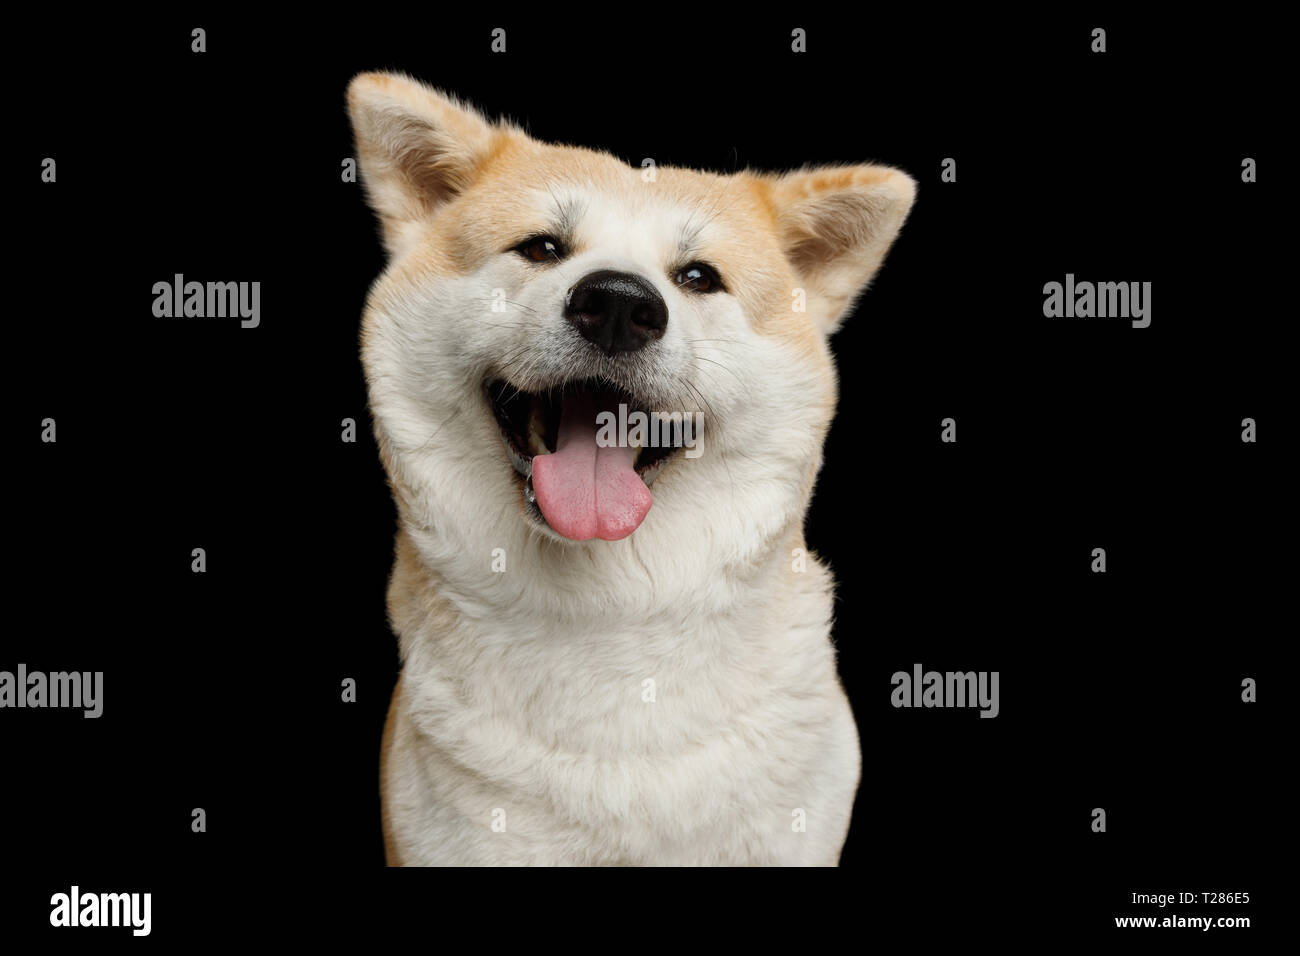 Funny Portrait of Happy Akita Inu Dog Smiling on Isolated Black Background, front view Stock Photo